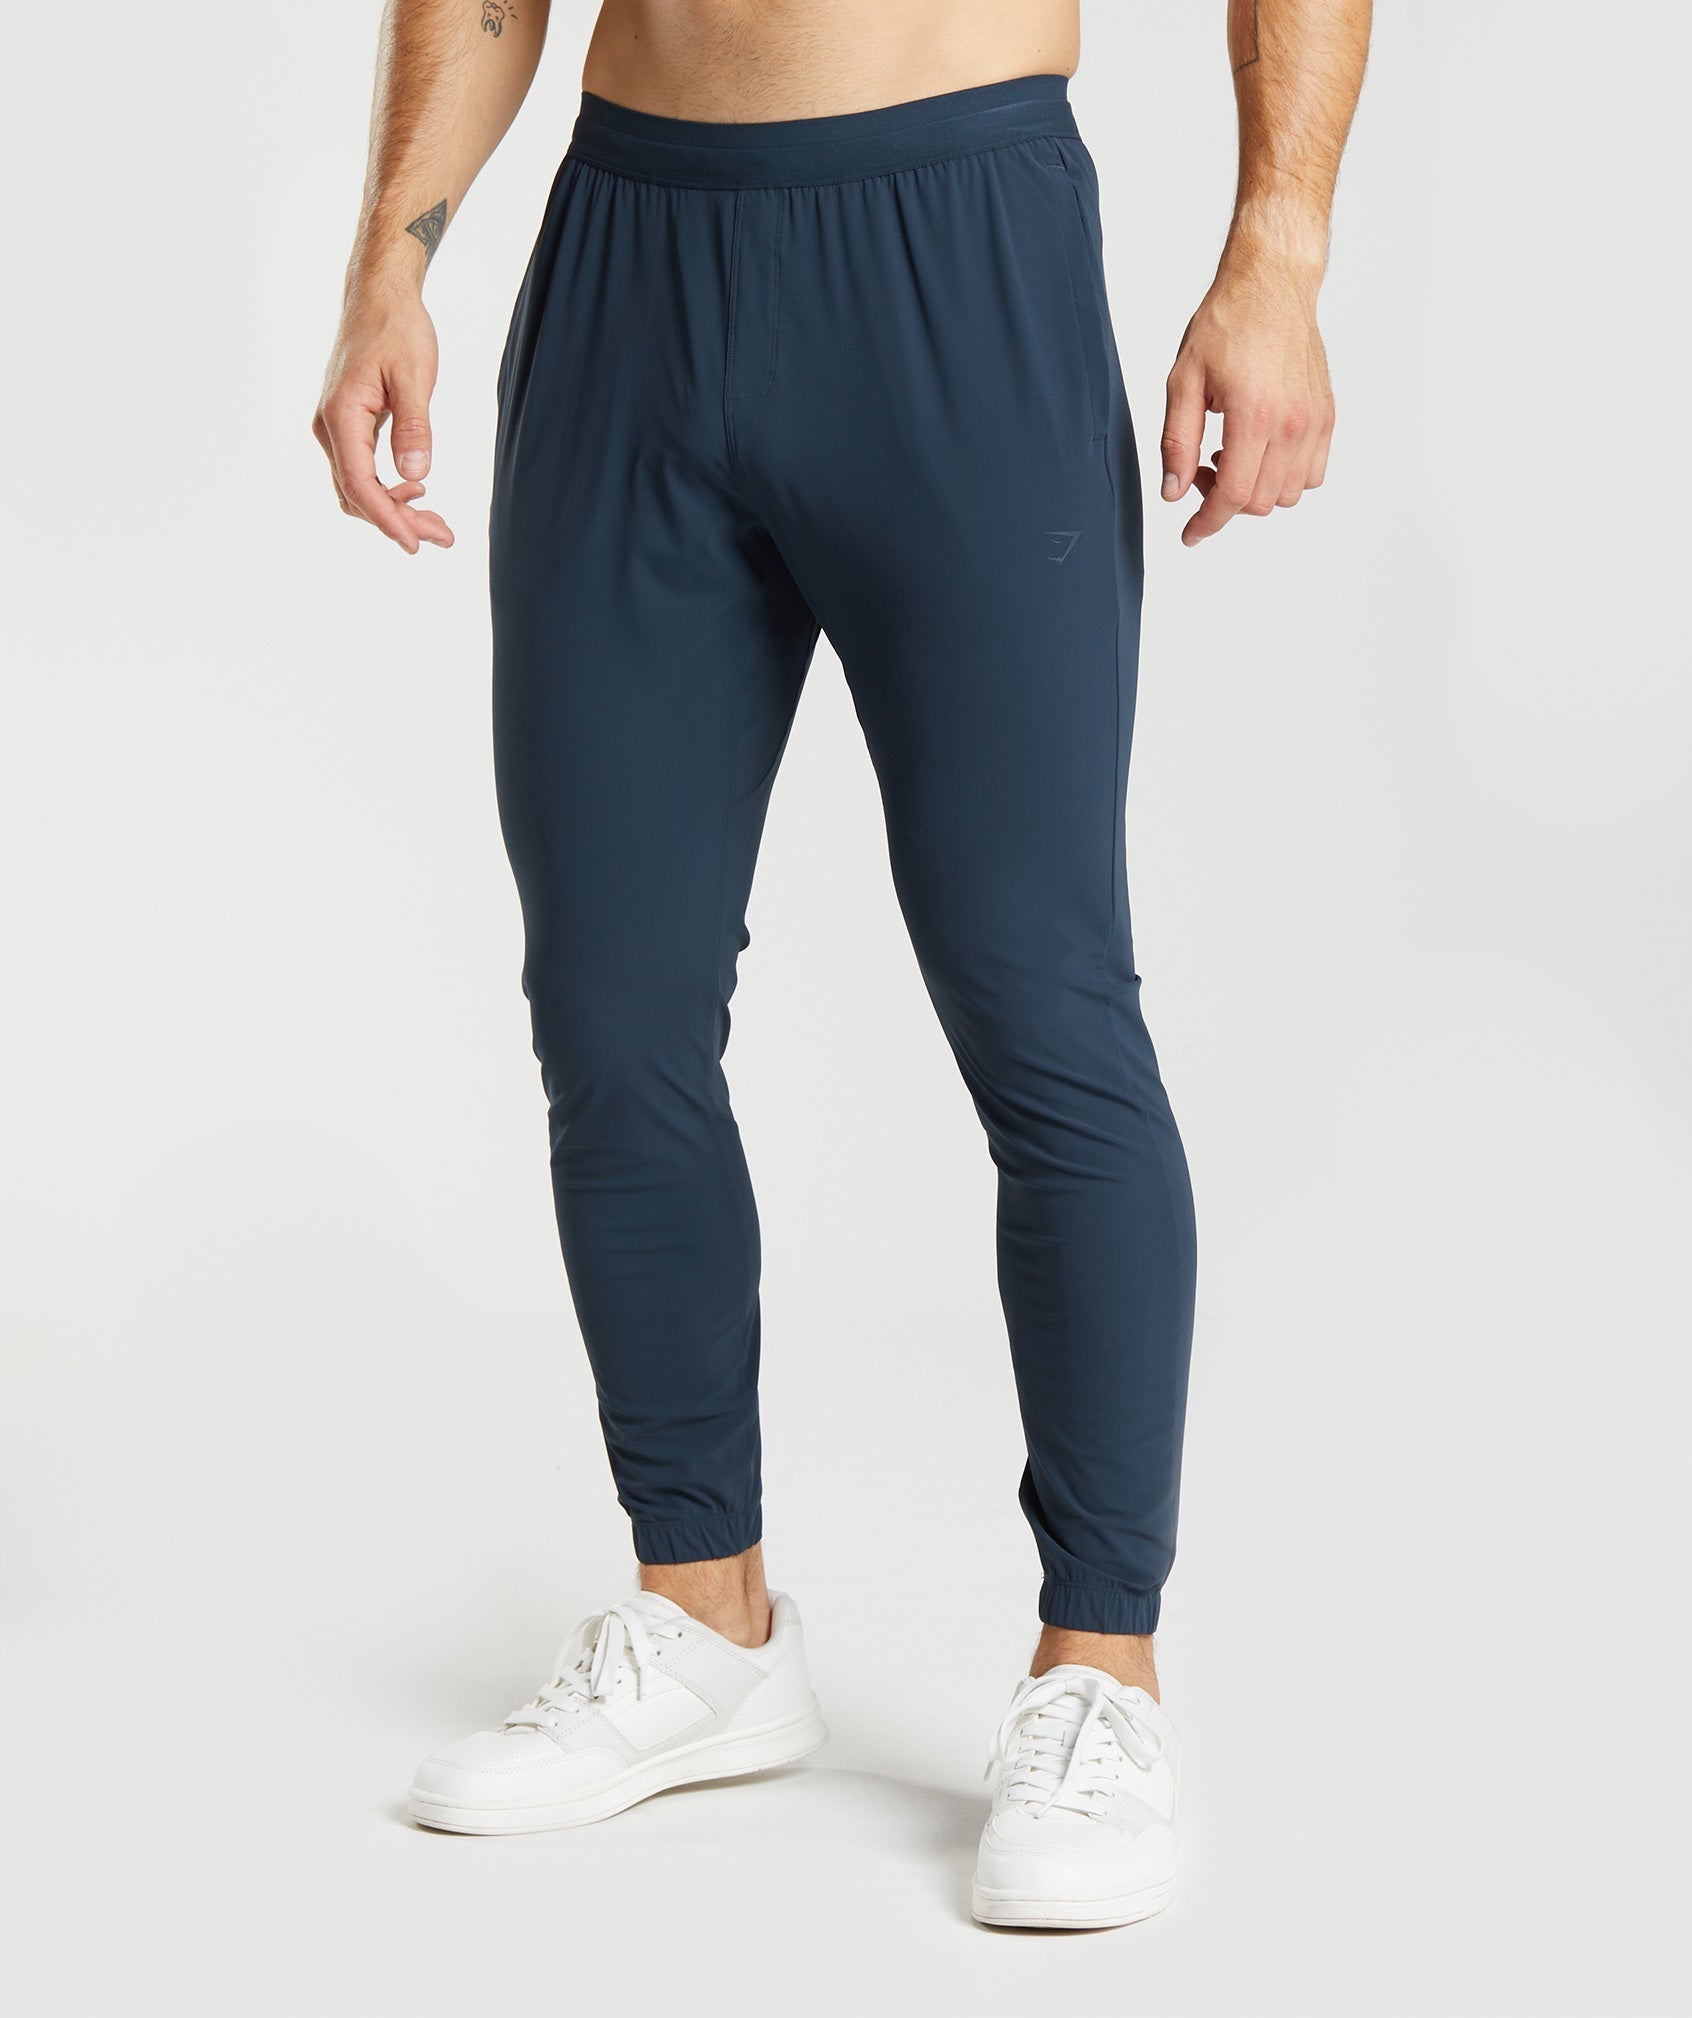 Gymshark Crest Joggers Black Size M - $20 (33% Off Retail) - From